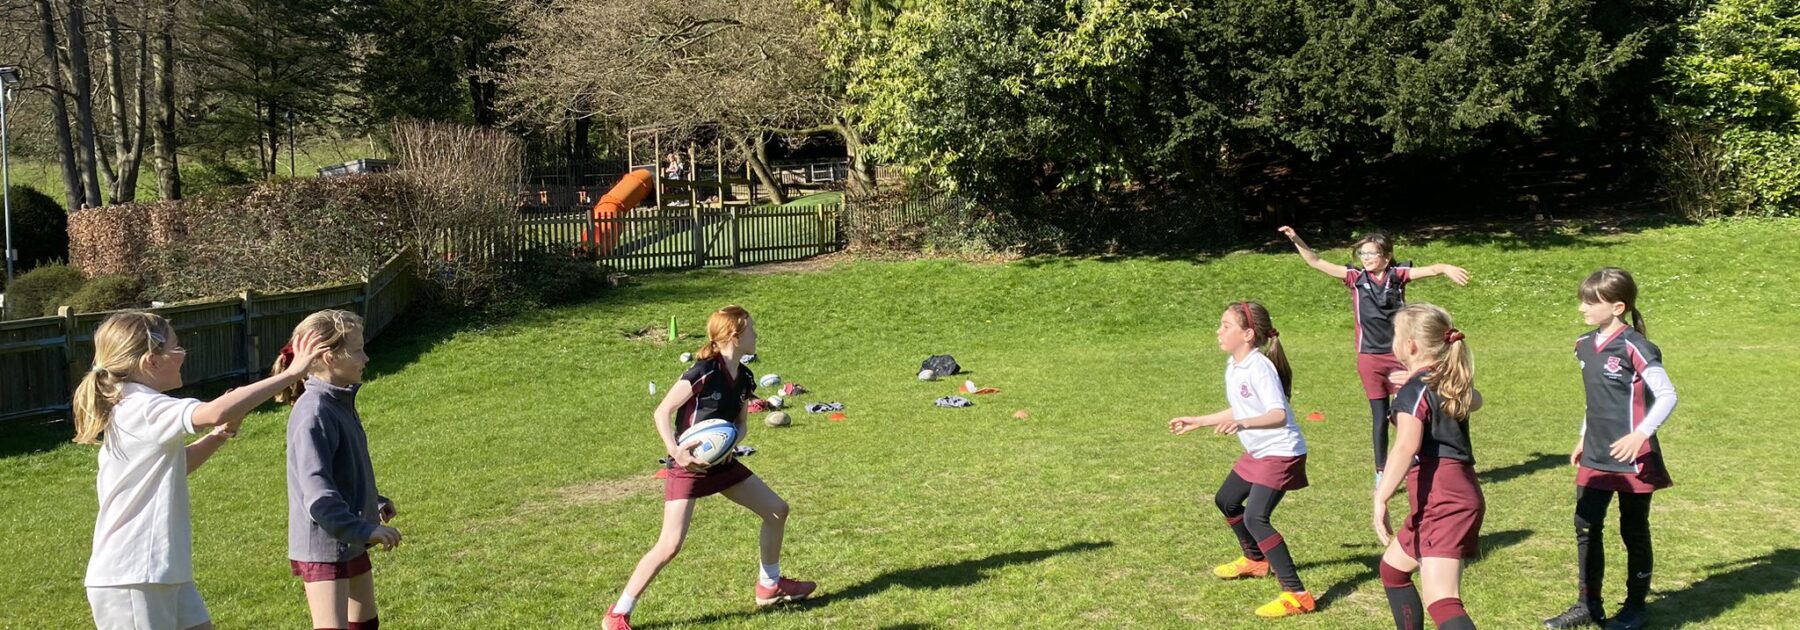 Harlequins Introduction to Girls’ Rugby Club